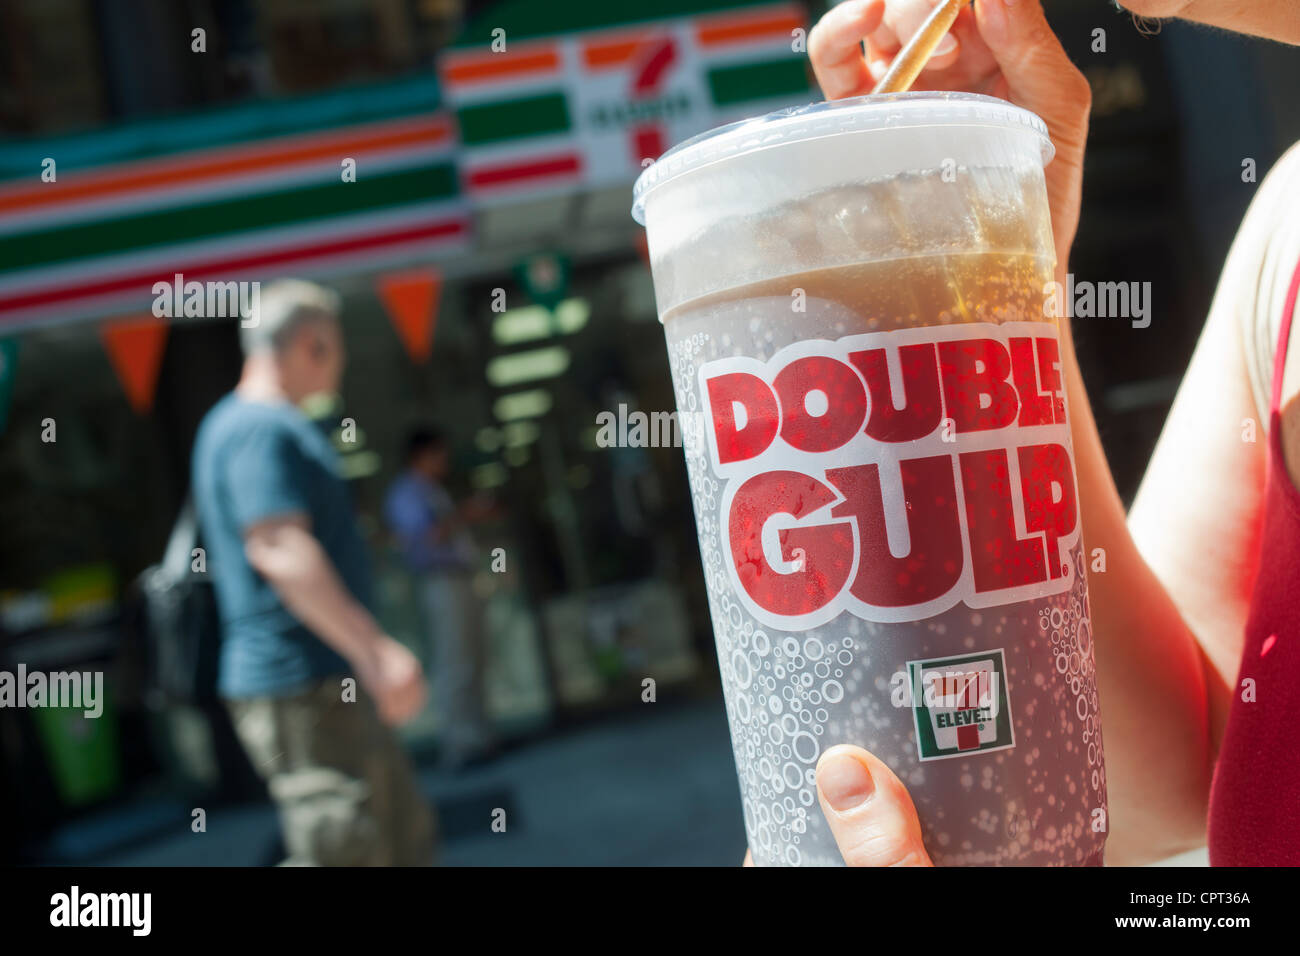 7-Eleven Stores - Oklahoma on X: Grab your favorite Big Gulp for